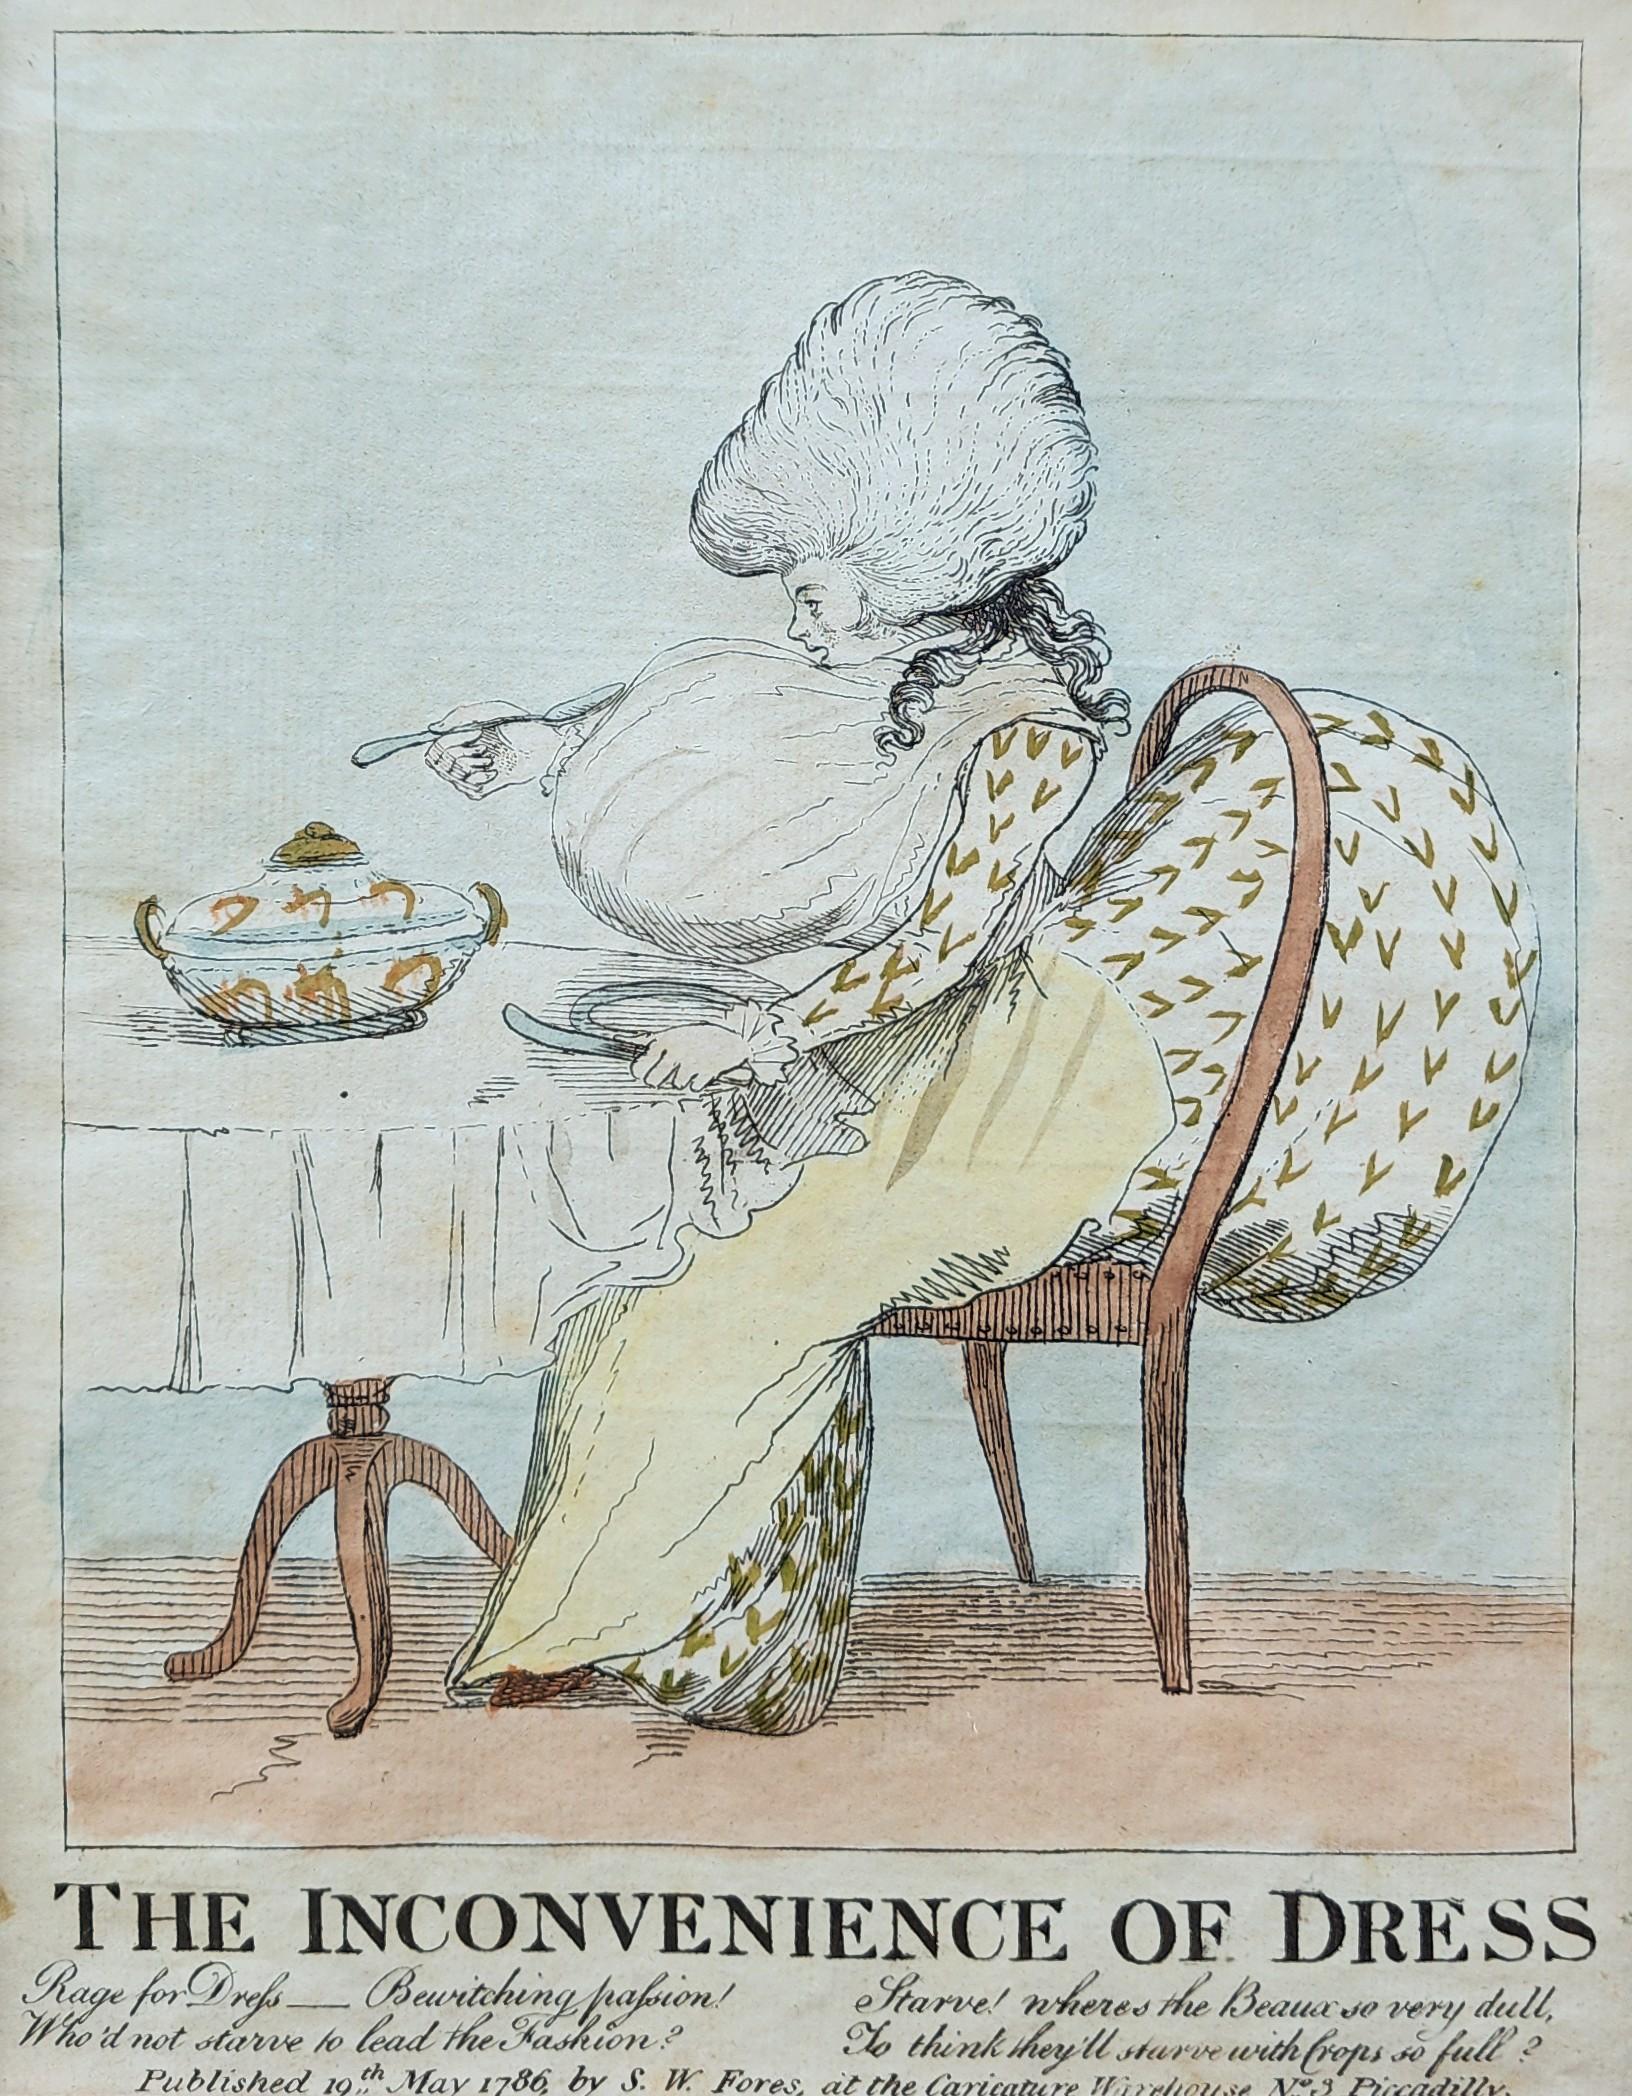 George Townley Stubbs (British, 1756-1815)

Published by: S W Fores

The Inconvenience of Dress, 1786

Etching and Engraving with Hand Coloring

Site Size: 9 1/4